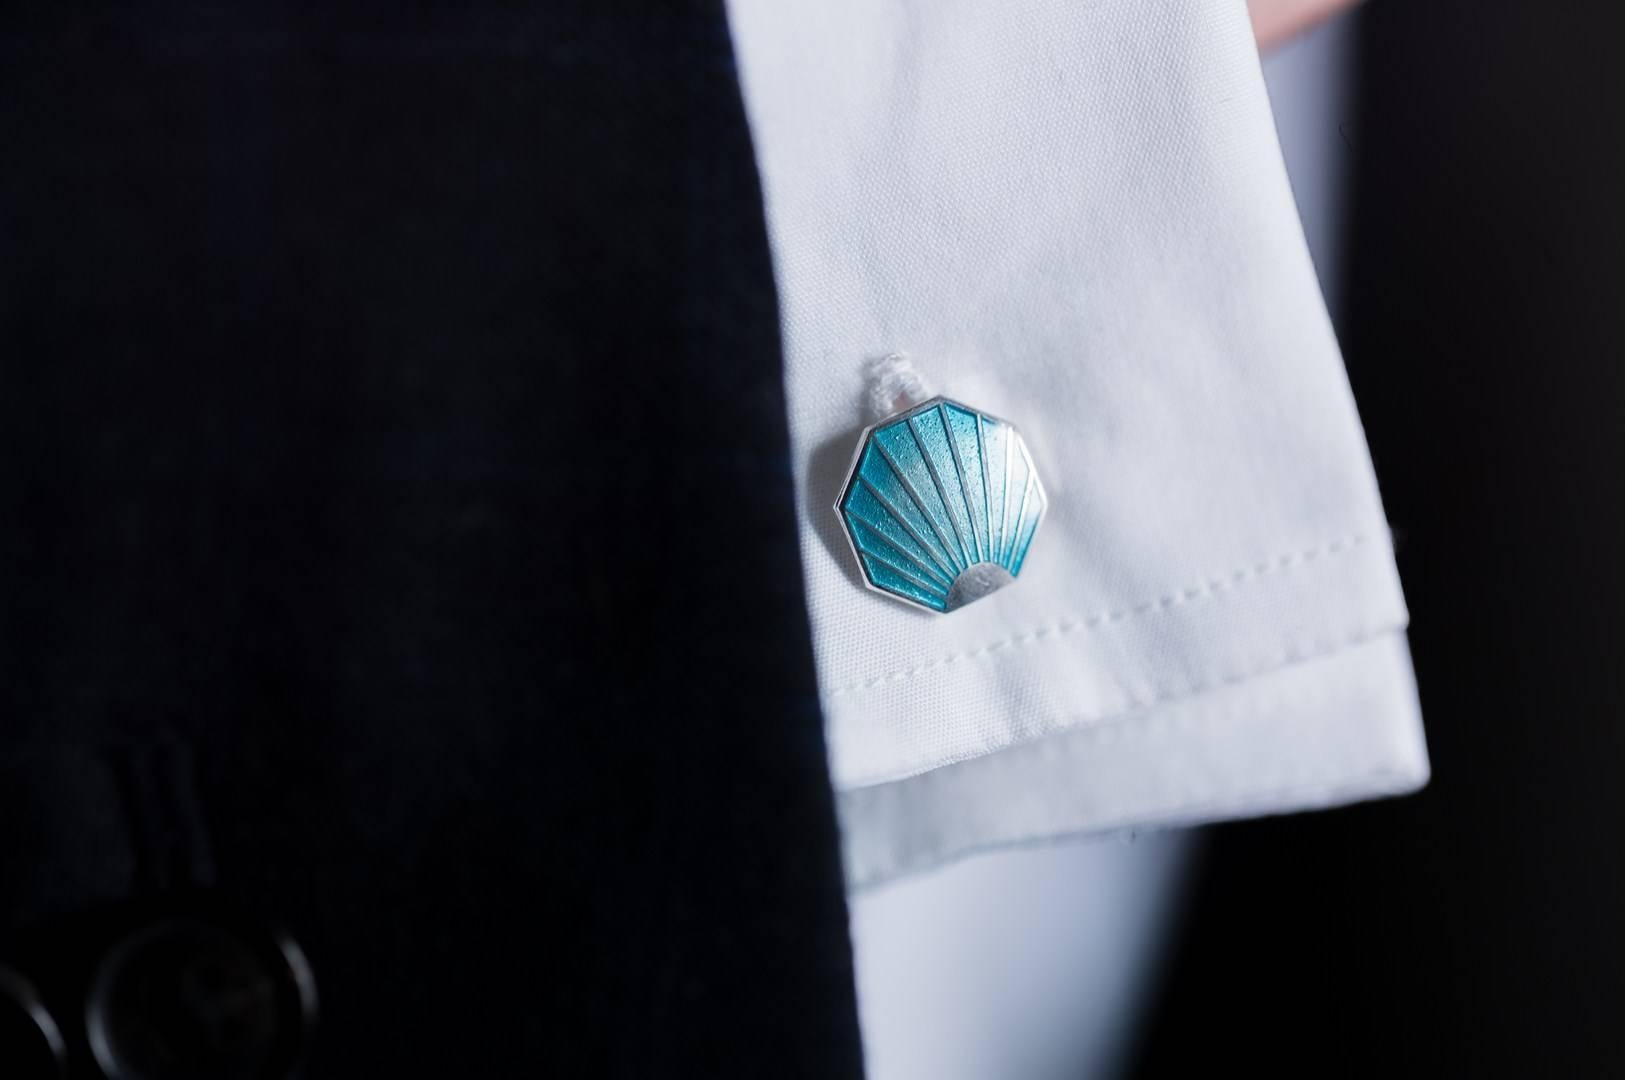 BERNARDO ANTICHITÀ PONTE VECCHIO FLORENCE

Made from sterling silver, these unique shell design cufflinks have a stunning hand-painted, turquoise blue hand-enamel finish.
With a nod to the vintage, these designs can be traced back to the 1900's and